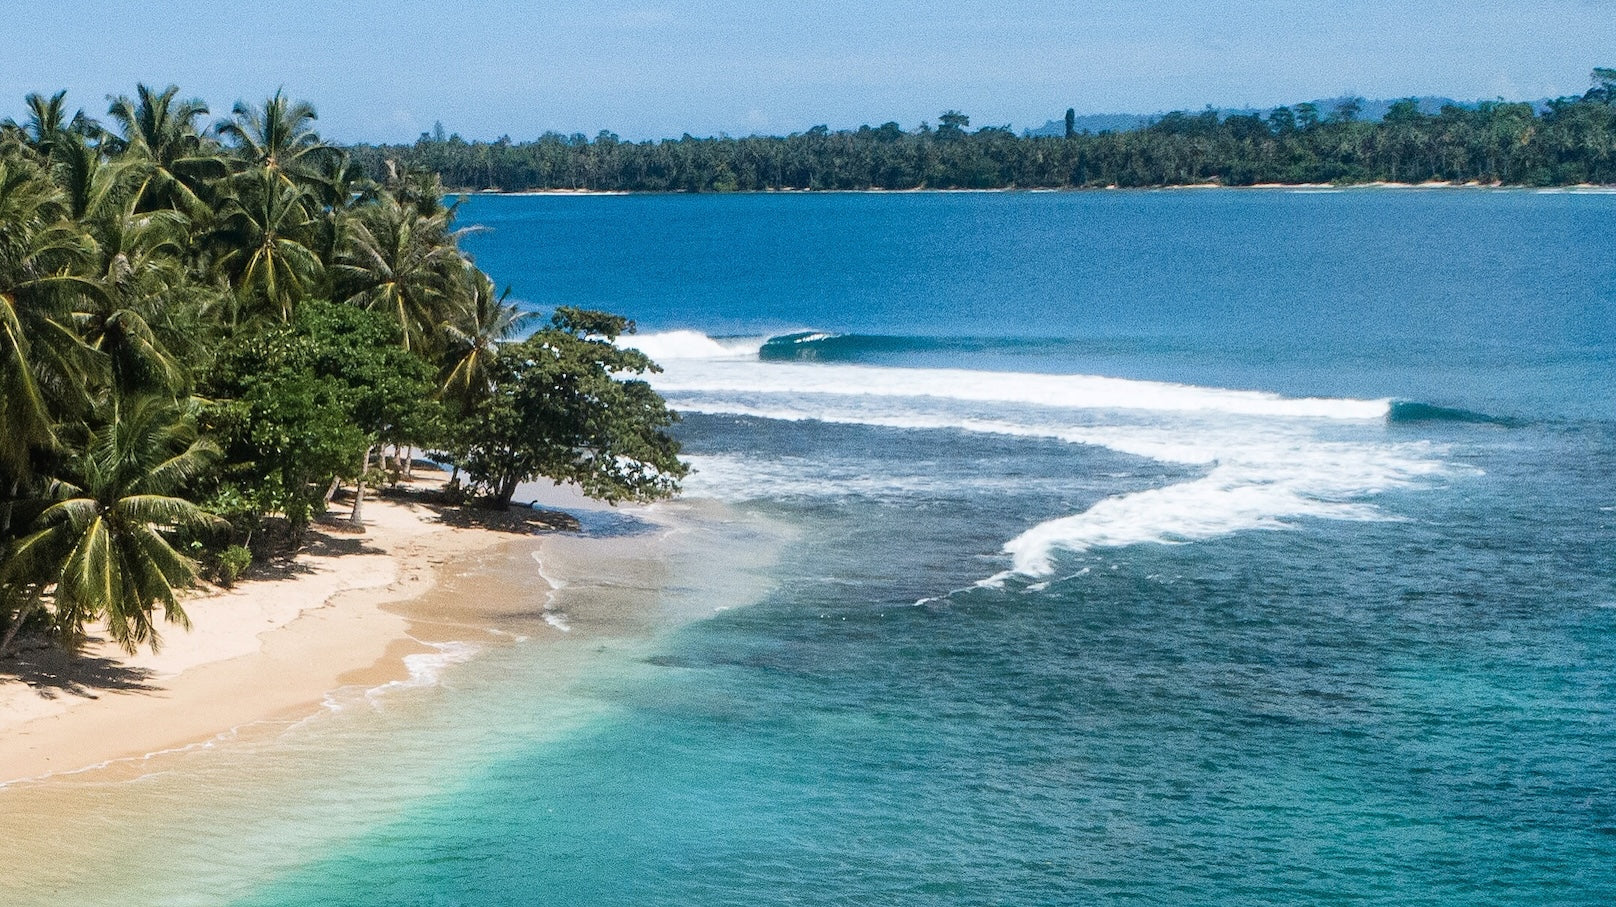 Aerial photo of the ocean and distant islands in Mentawai, Indonesia